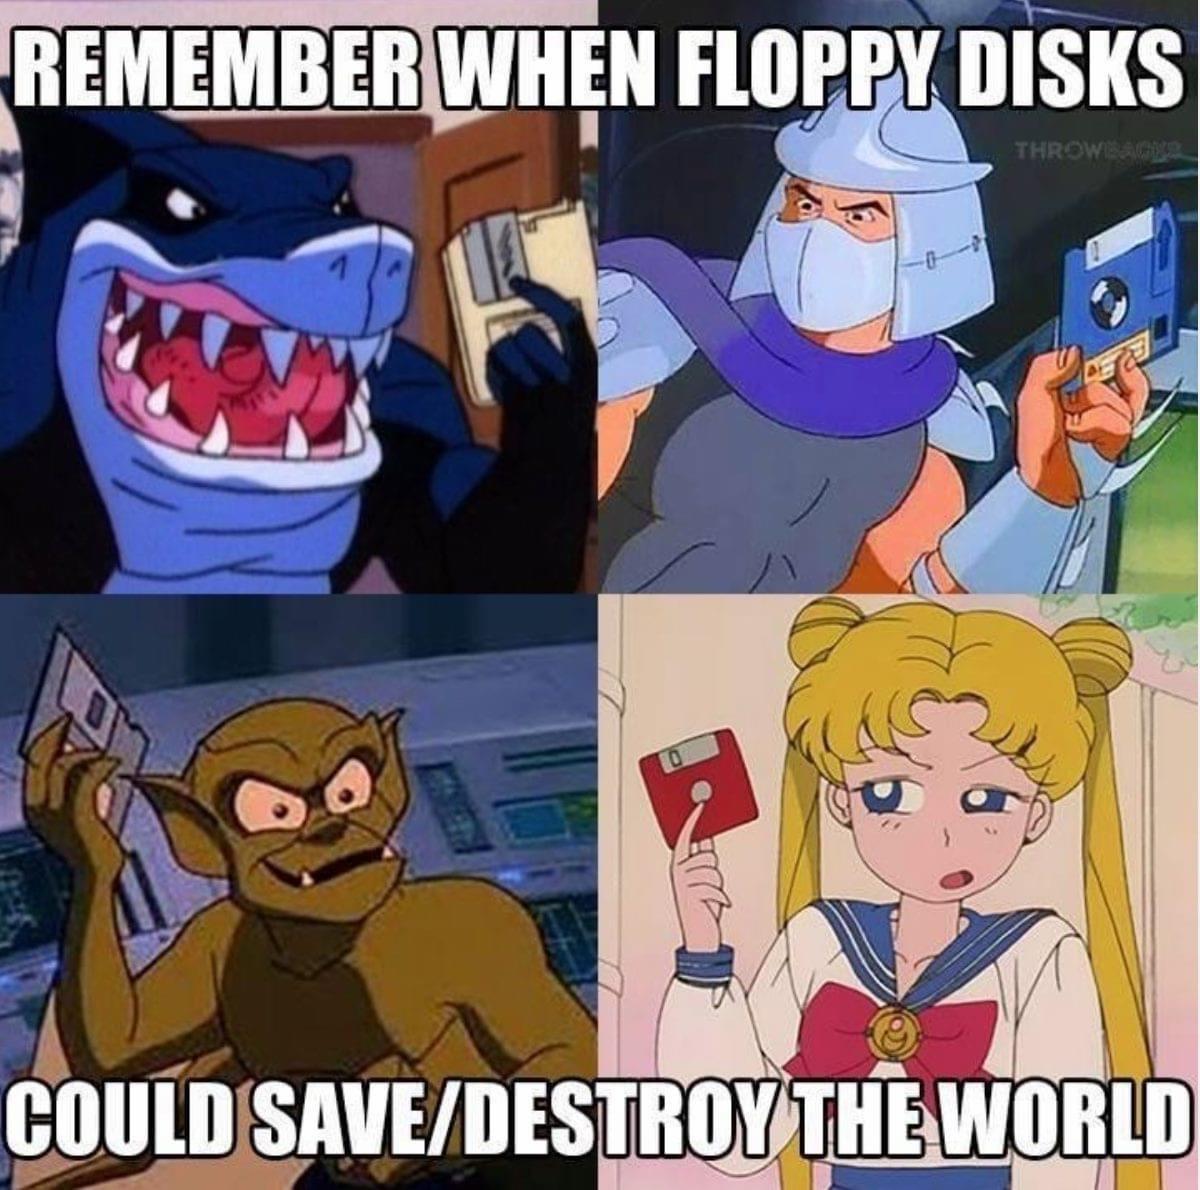 funny memes and pics - Remember When Floppy Disks Thrown Could Save/Destroy The World